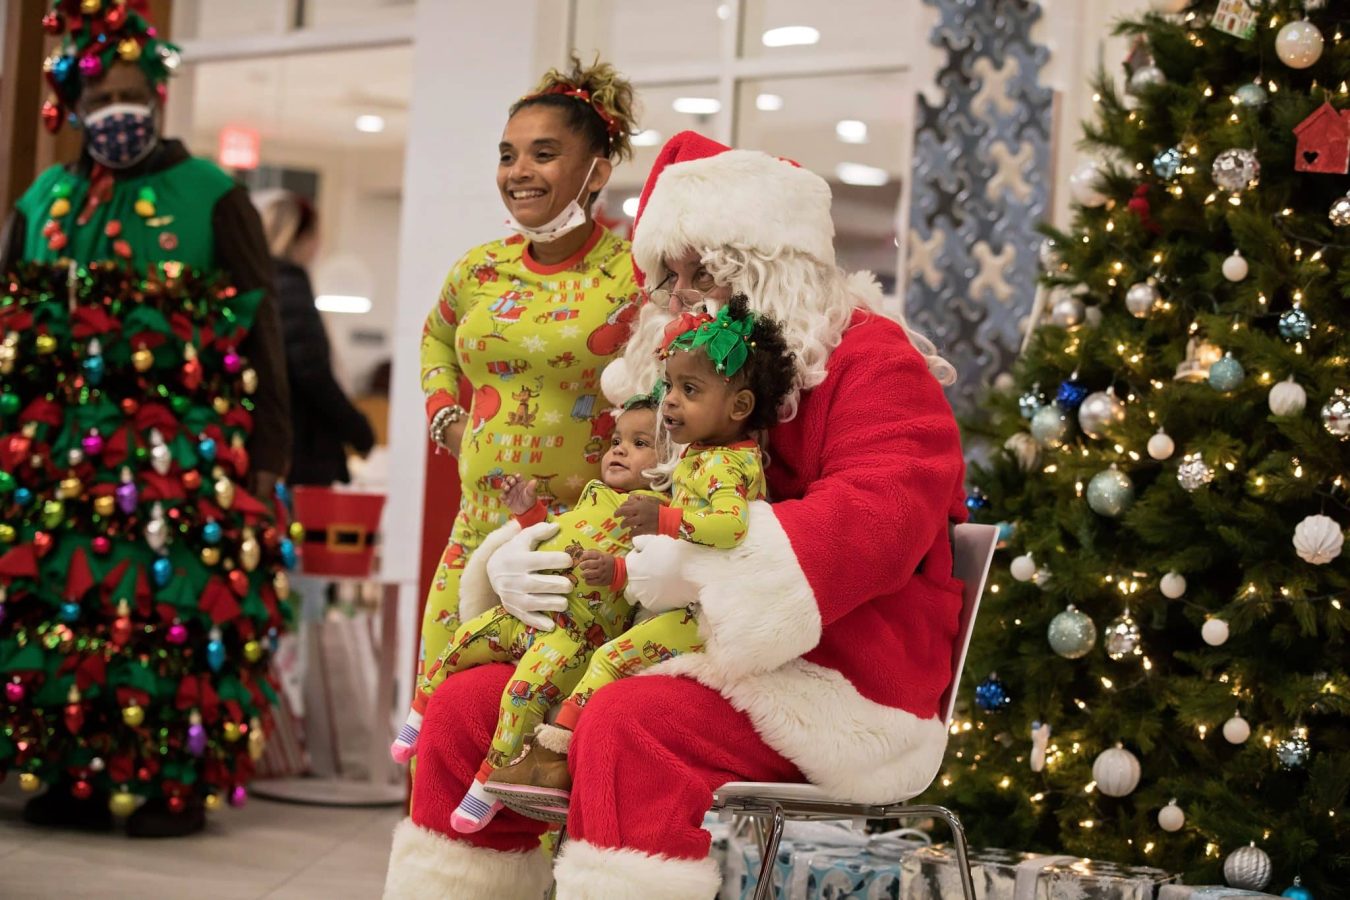 Image from Comfort and Joy - Children taking a picture with Santa